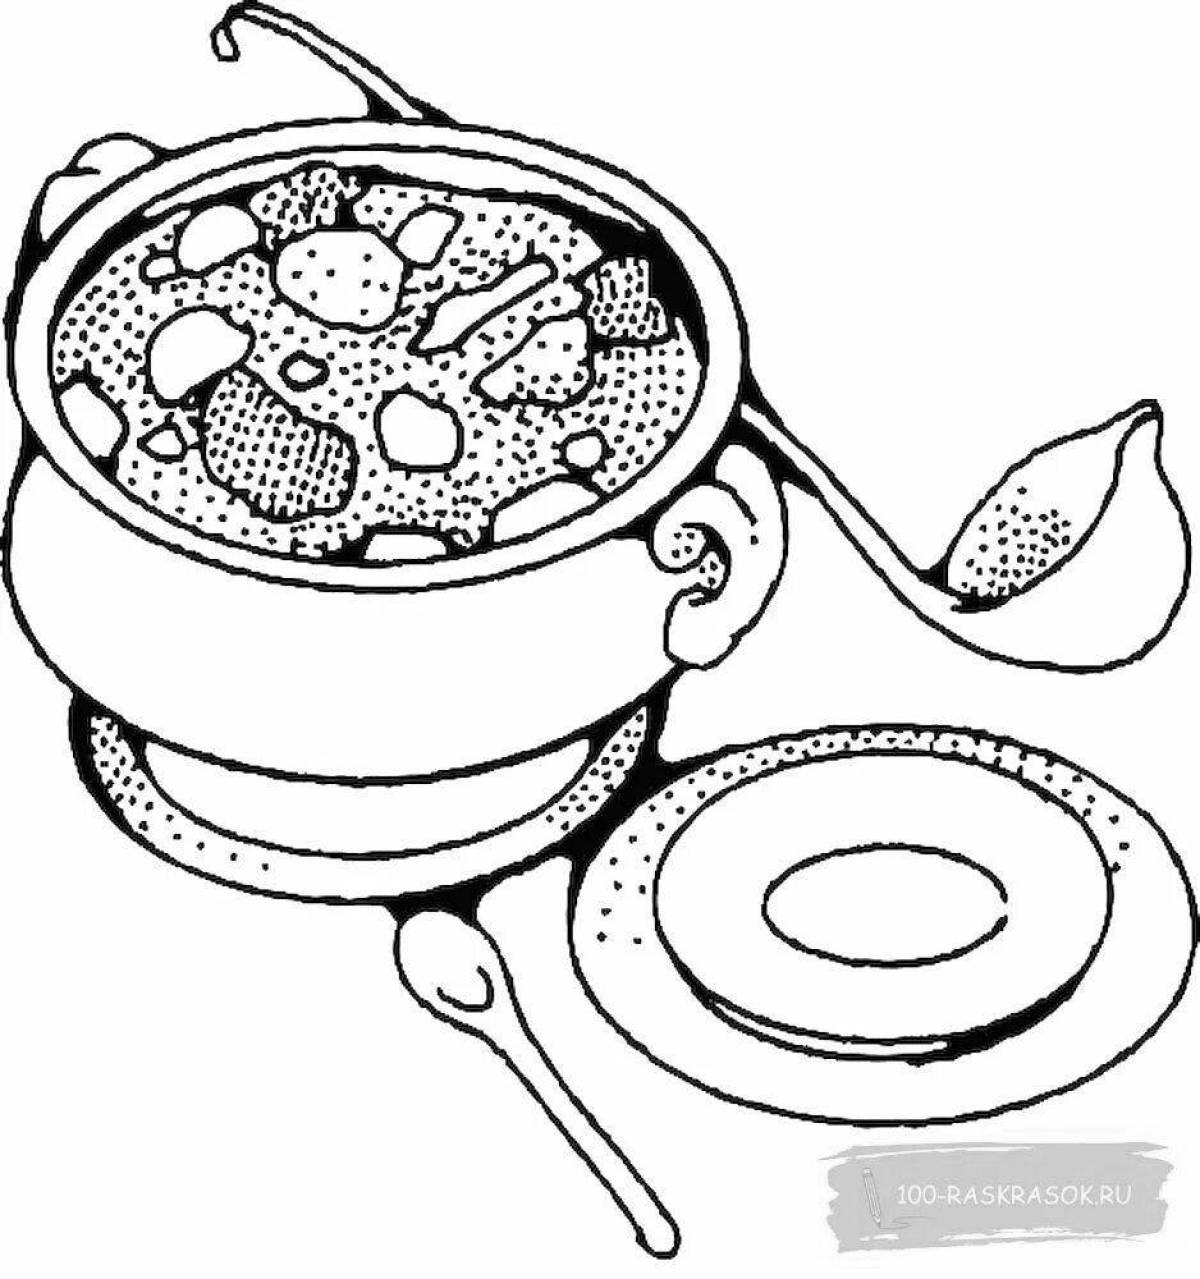 Coloring page refreshing national dishes